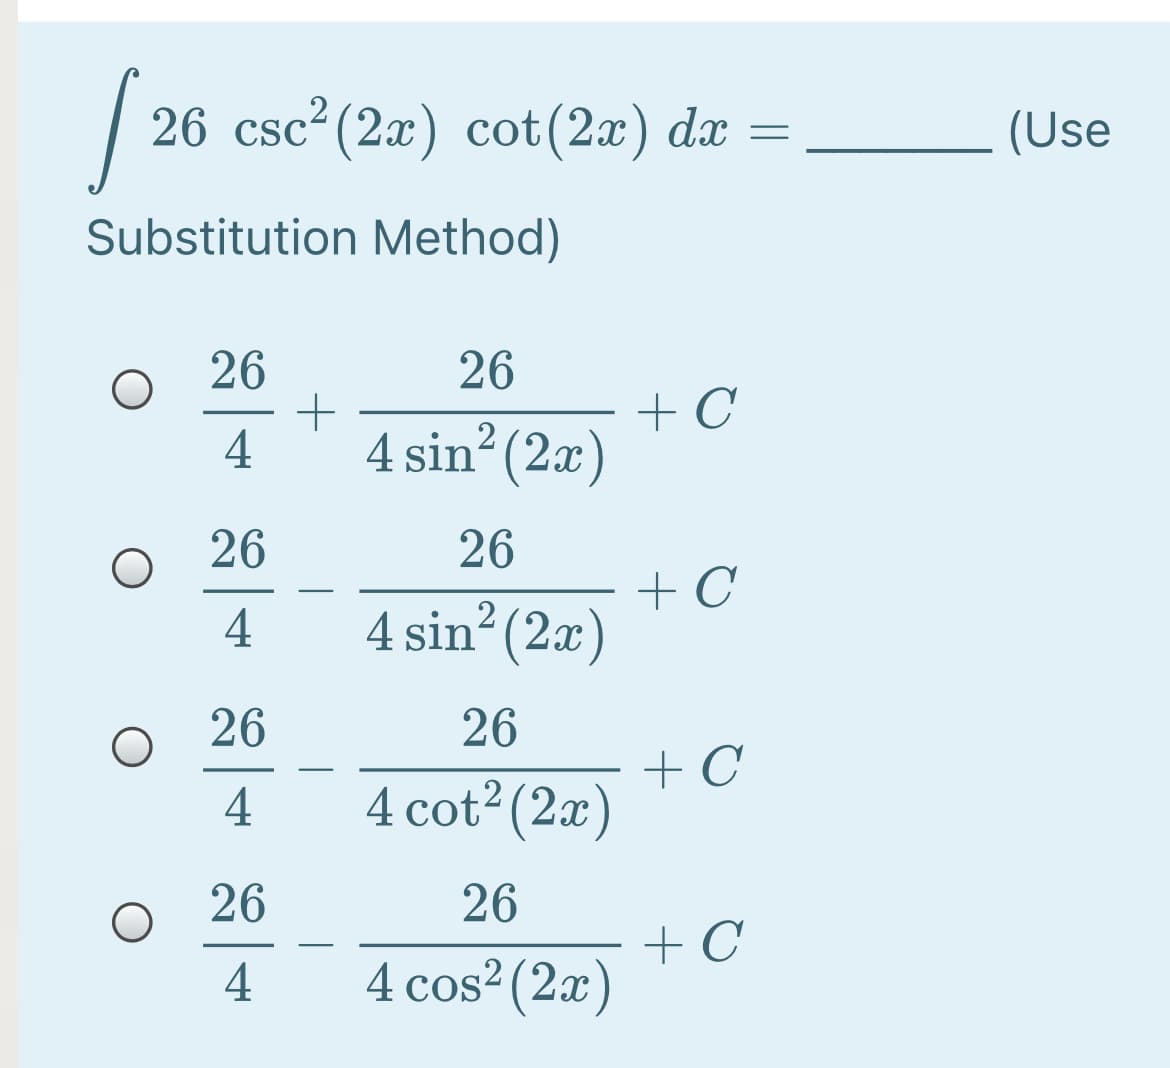 26 csc²(2x) cot (2x) dx =
(Use
Substitution Method)
26
26
4
4 sin (2x)
26
26
+ C
4 sin? (2x)
-
4
26
26
+ C
4 cot2 (2x)
-
4
26
26
+ C
4 cos² (2x)
4
